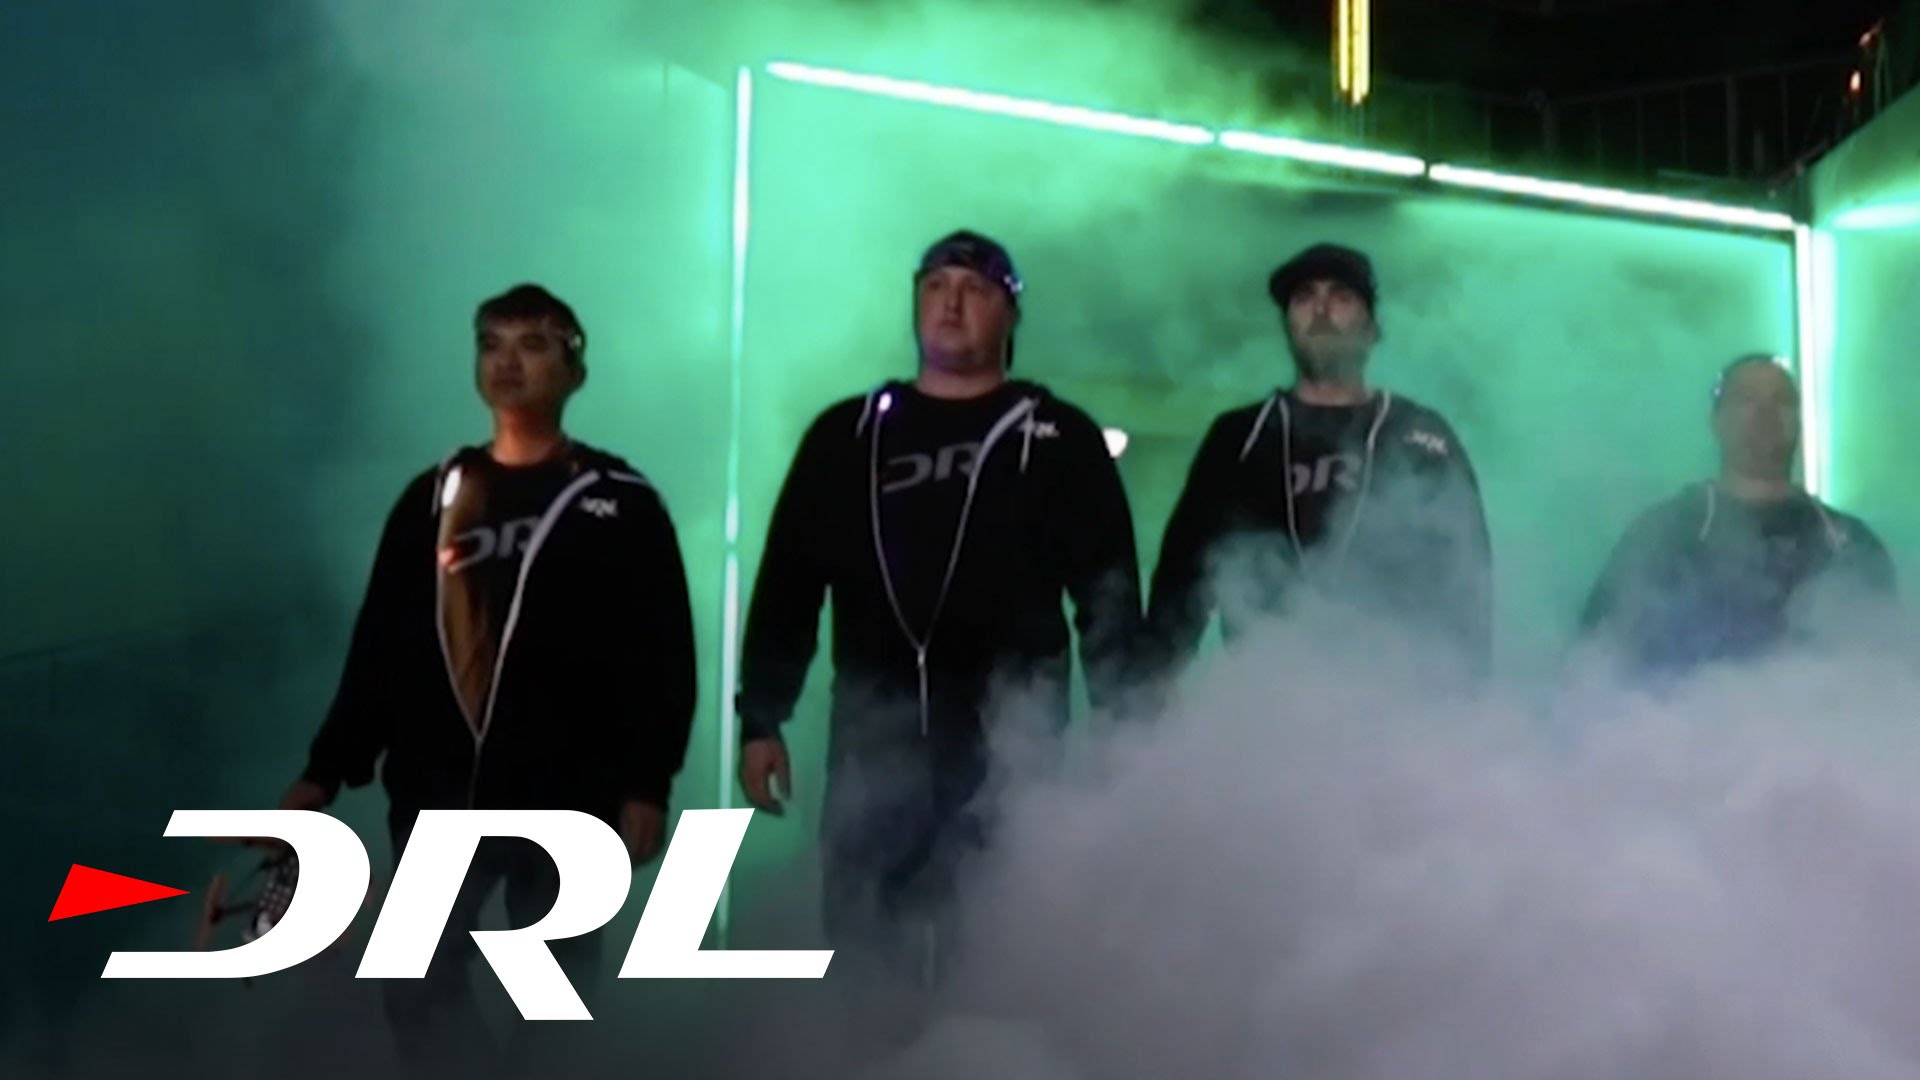 Drone Racing League 101: Who are DRL Pilots? | DRL